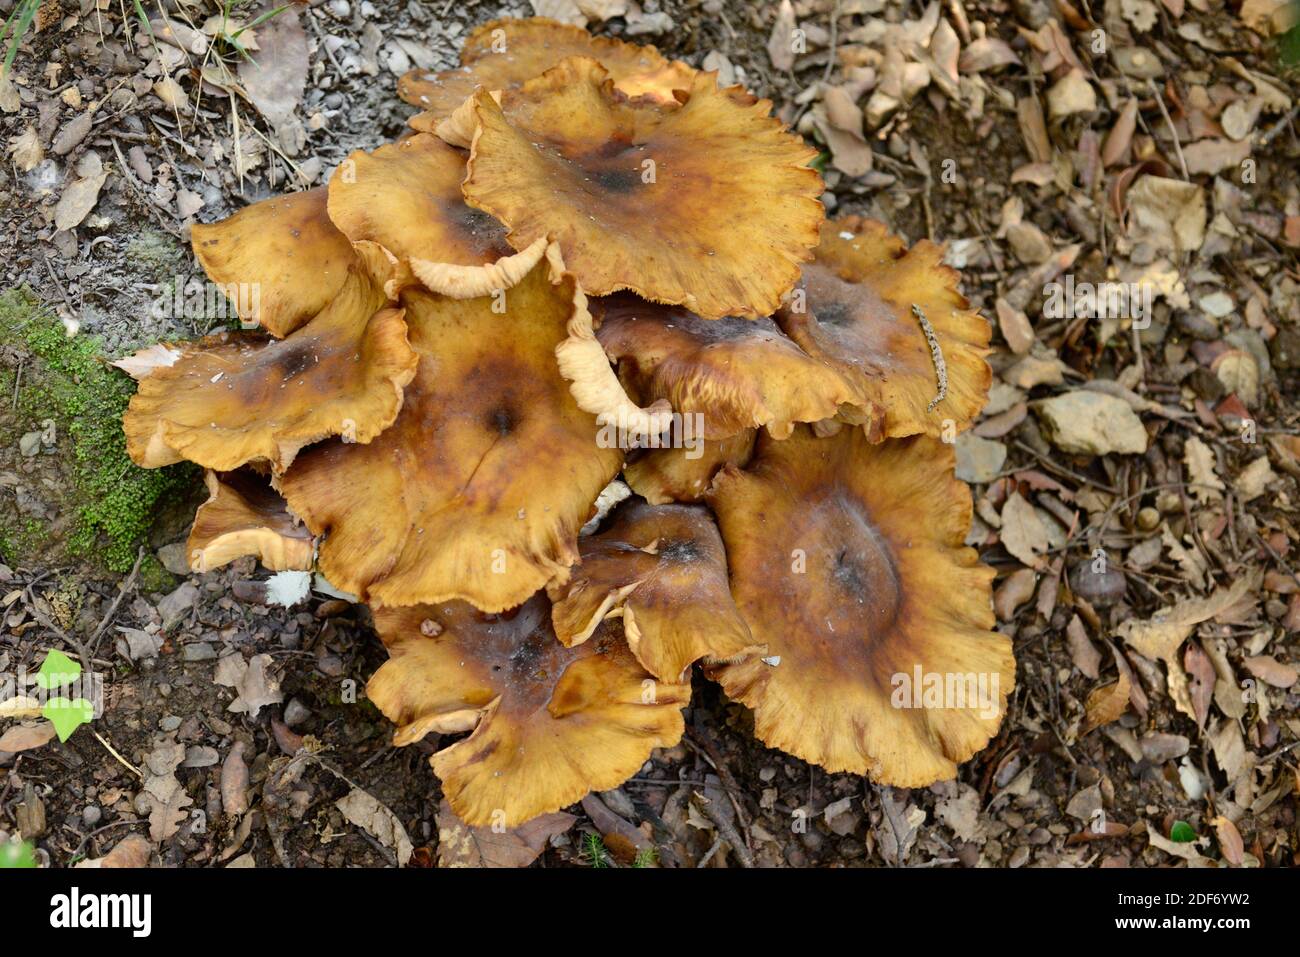 Honey fungus (Armillaria mellea) is an edible fungus pathogen of plants. This photo was taken in Montseny Biosphere Reserve, Barcelona province, Stock Photo